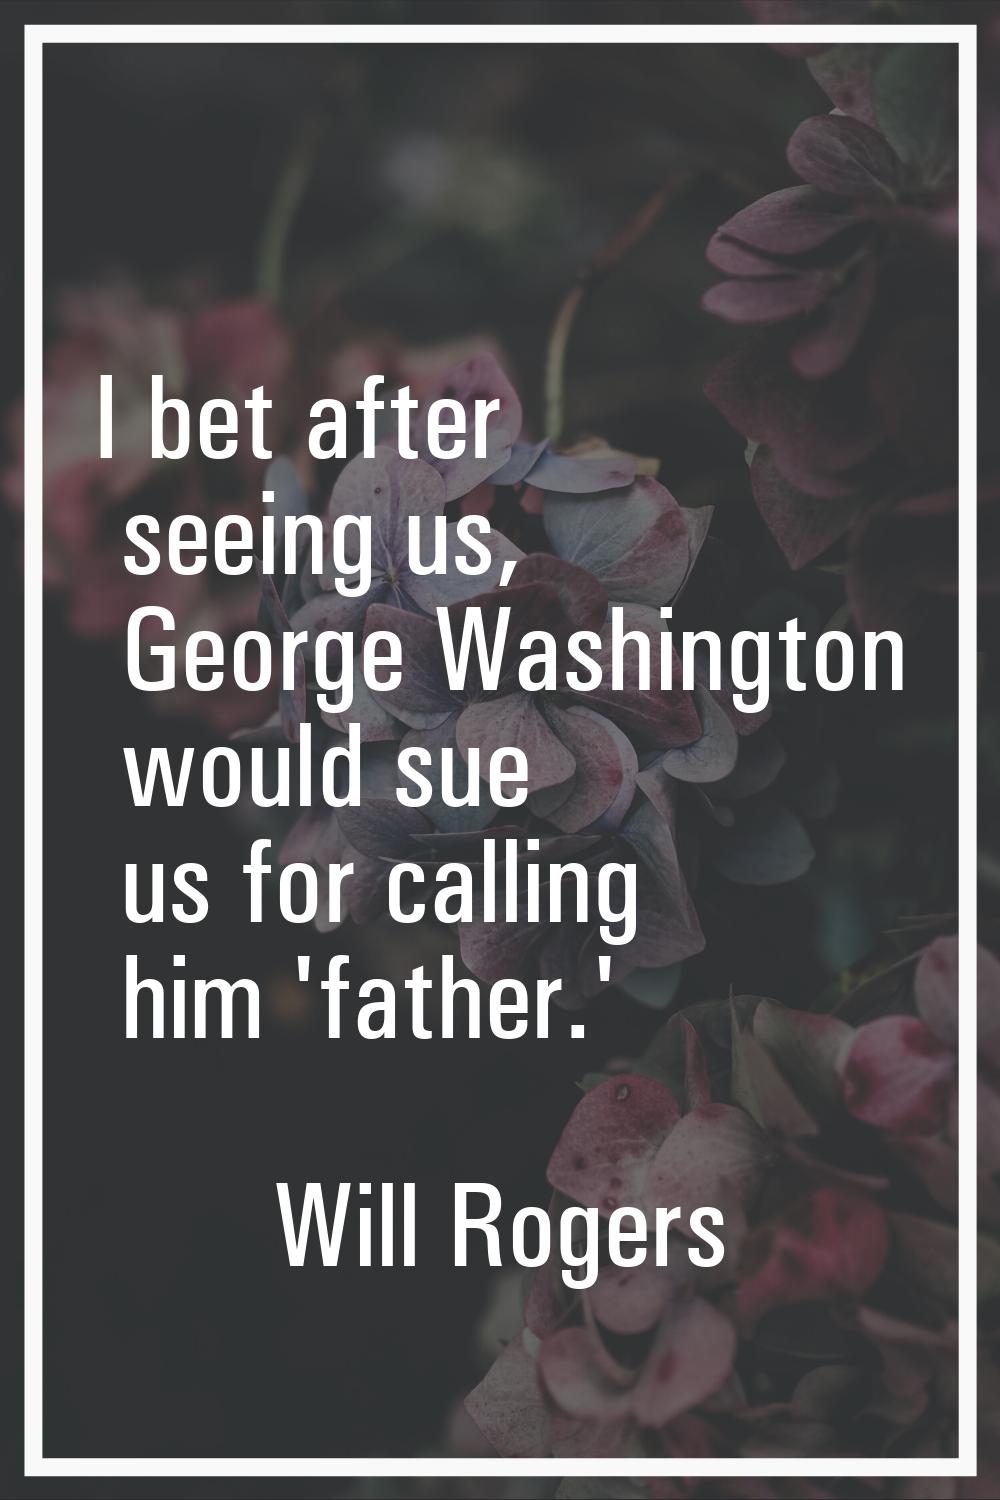 I bet after seeing us, George Washington would sue us for calling him 'father.'